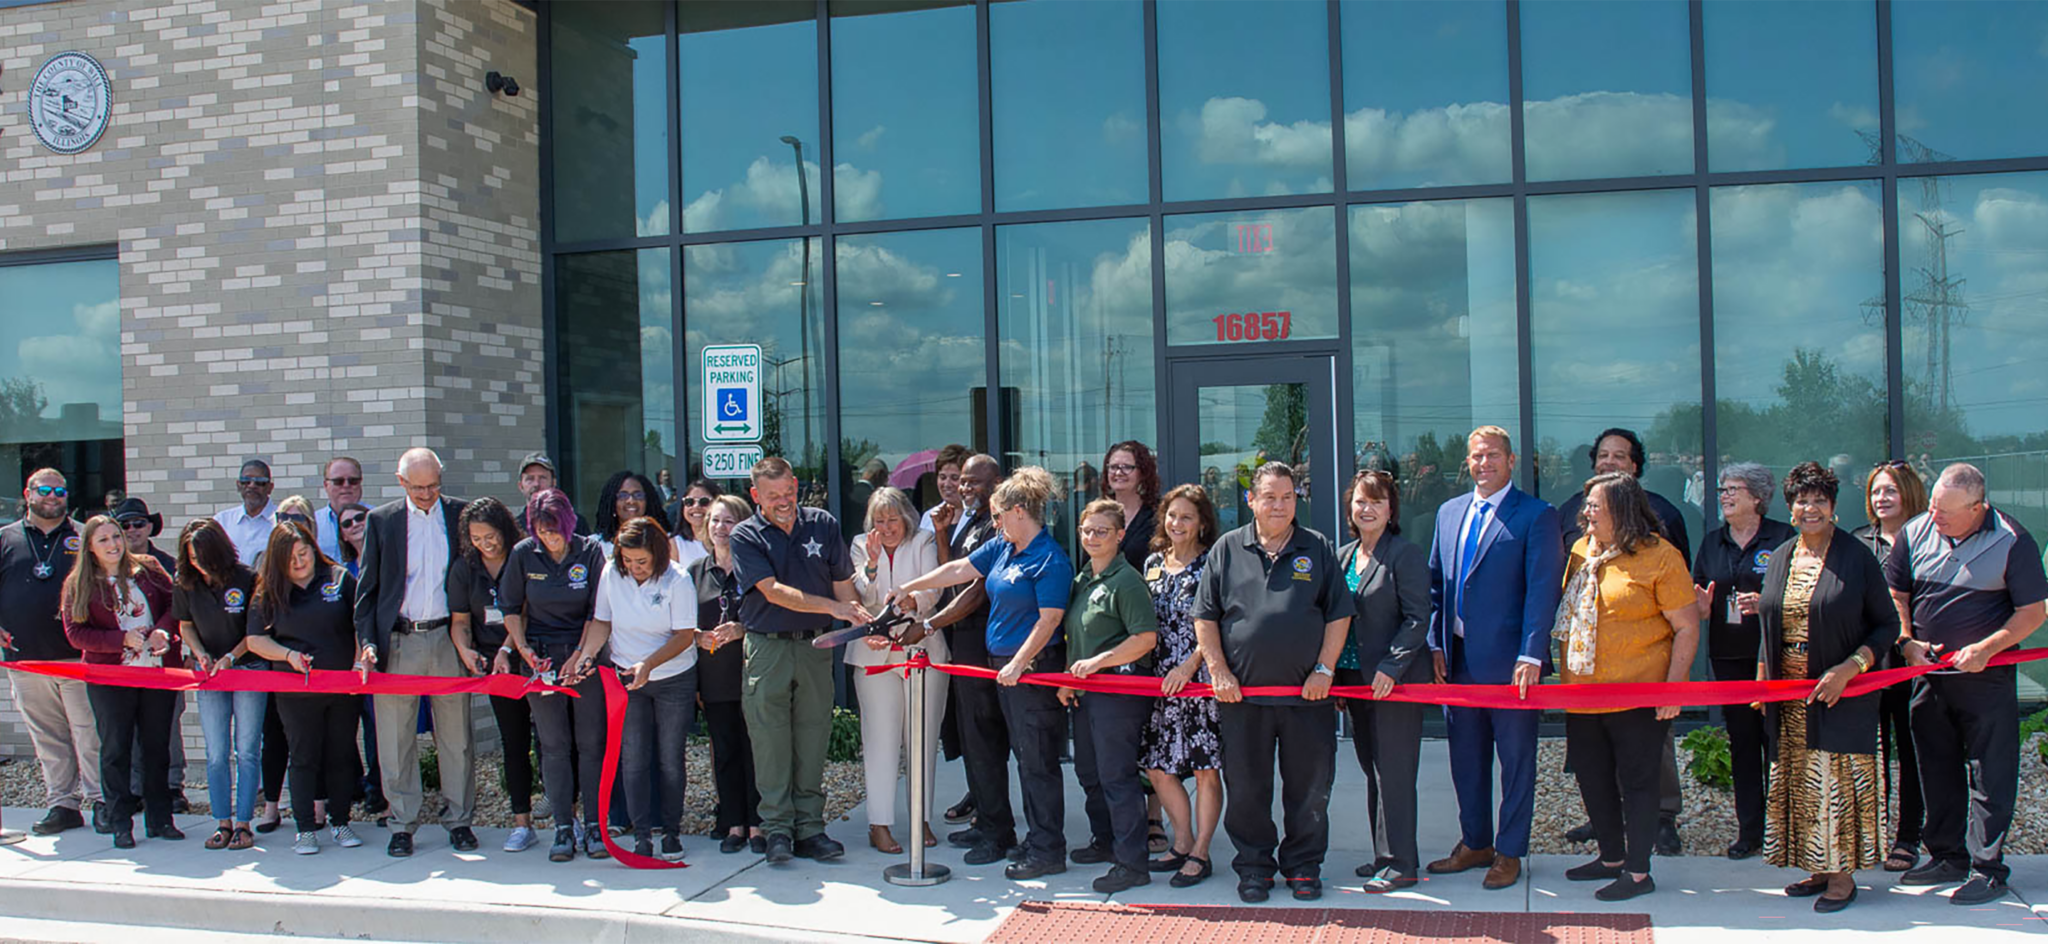 Leopardo Cuts Ribbon on New Coroner’s Facility and Morgue for Will County